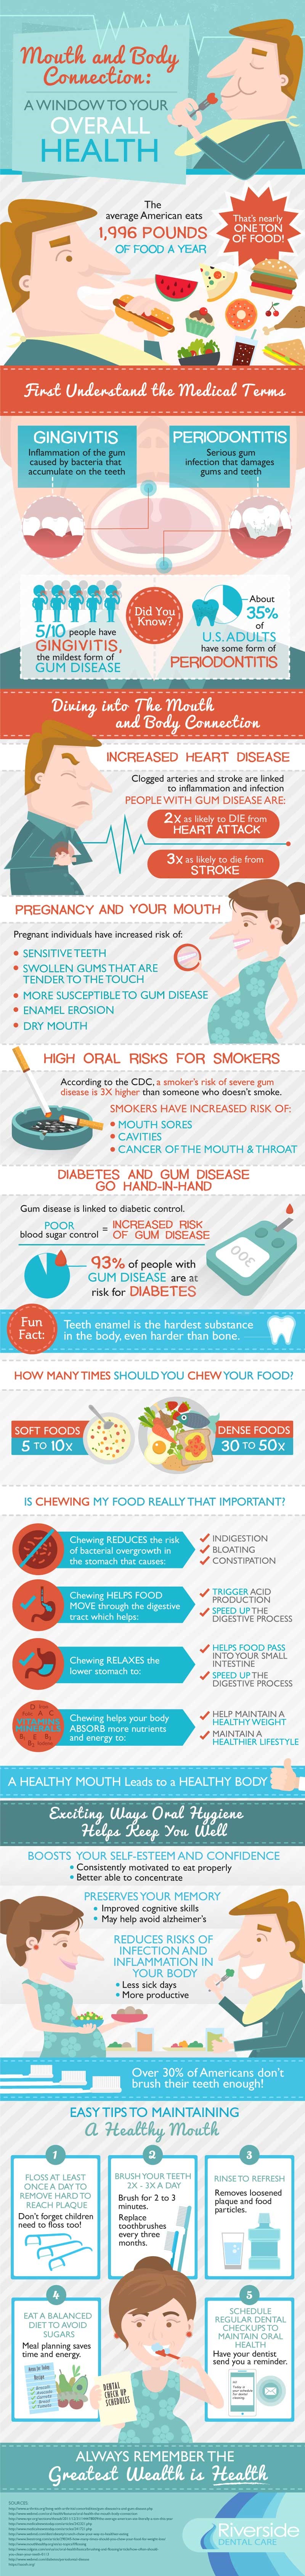 Mouth and Body Connection: A Window To Your Overall Health Infographic